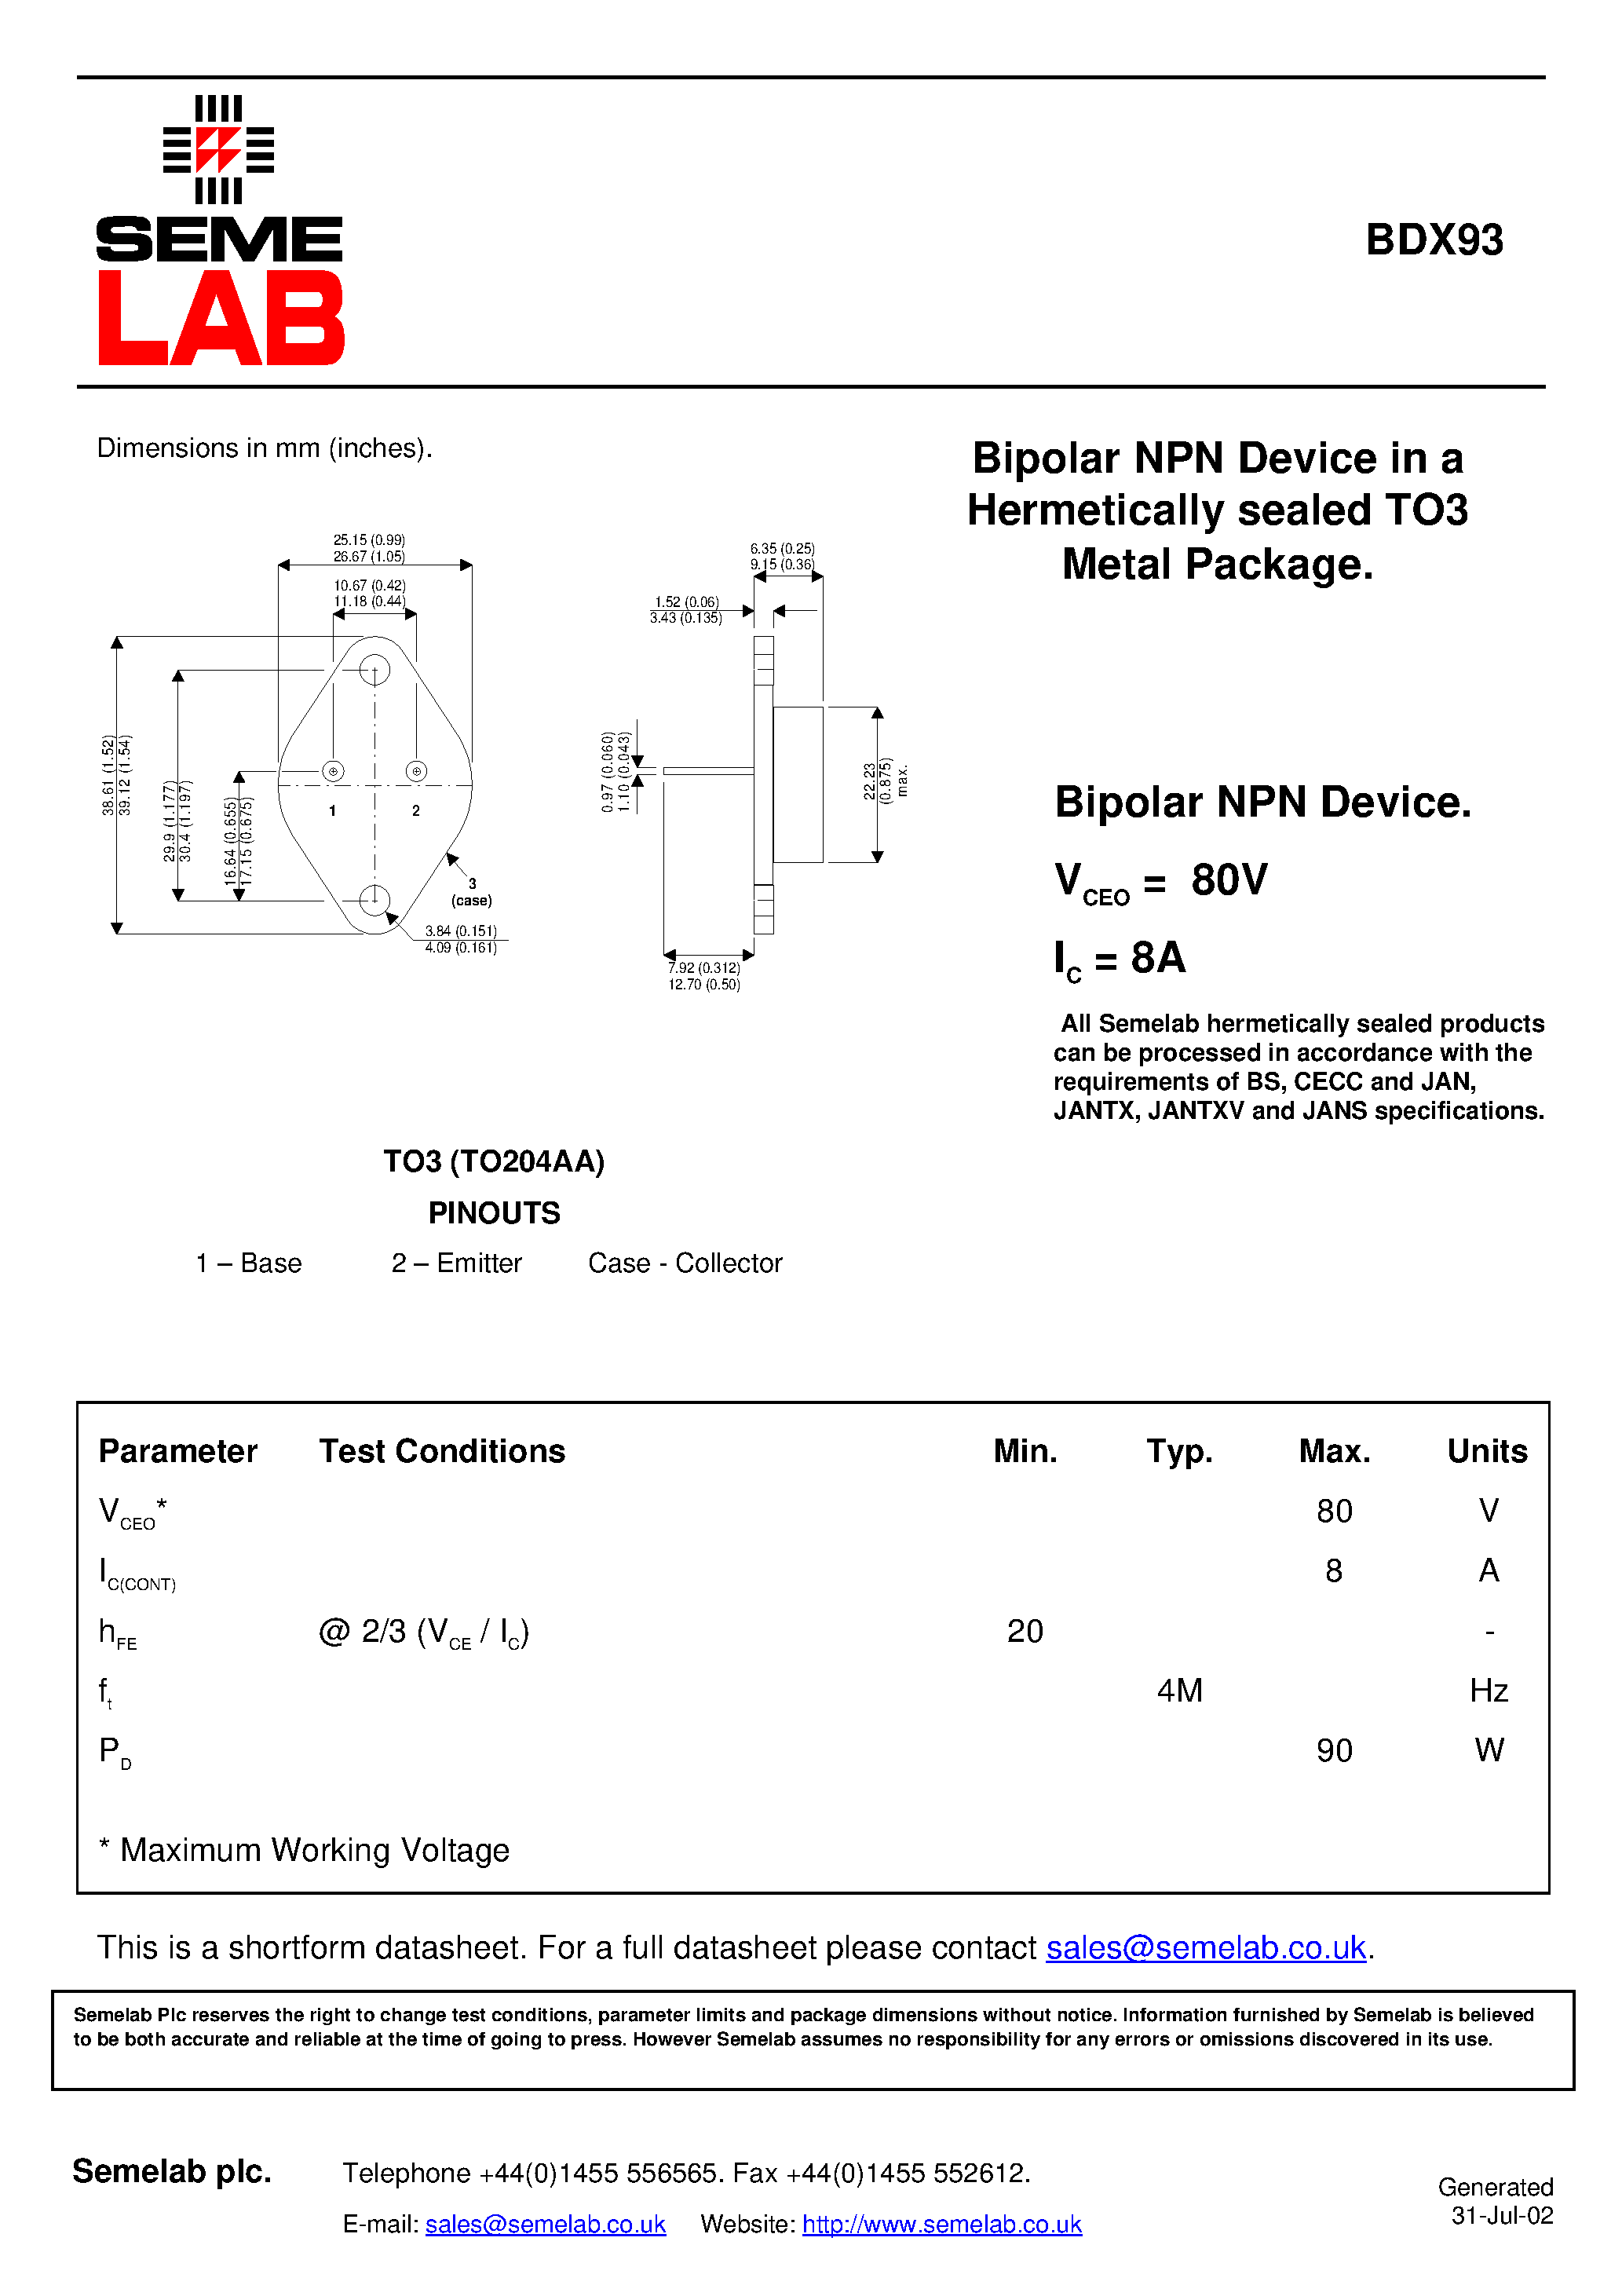 Datasheet BDX93 - Bipolar NPN Device in a Hermetically sealed TO3 Metal Package page 1